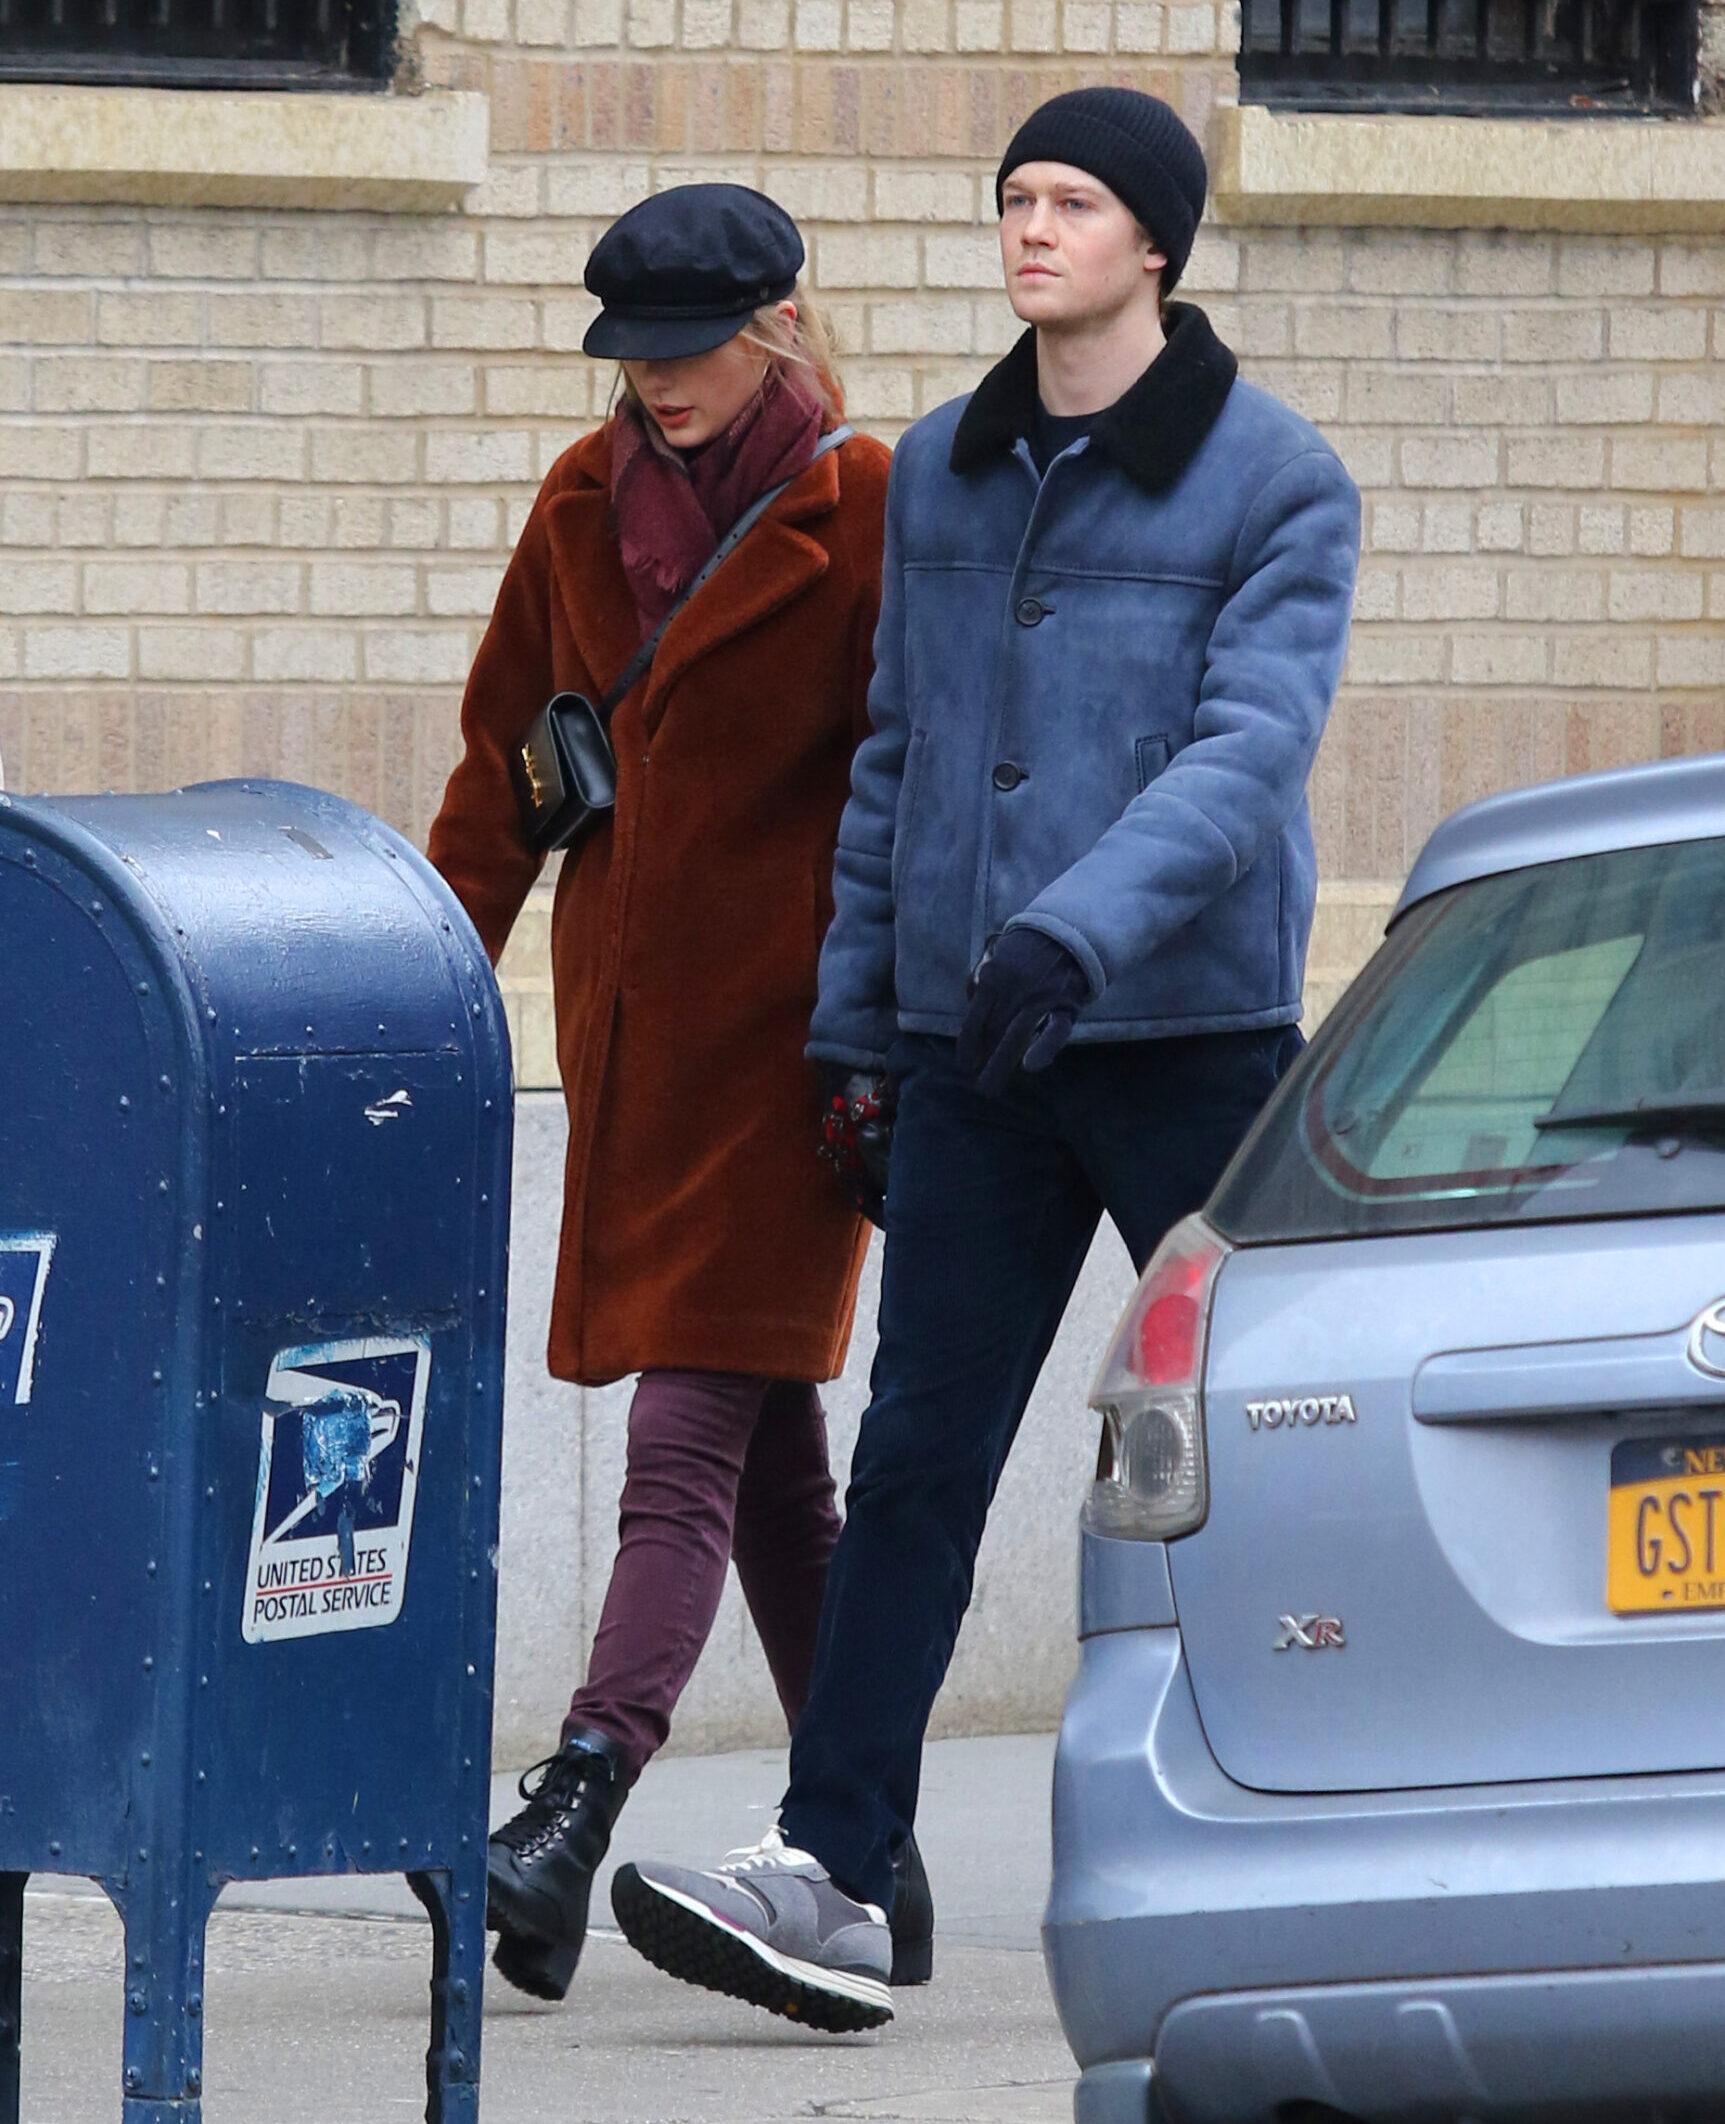 Taylor Swift hand-in-hand with Joe Alwyn go on a long walk after lunch in NYC